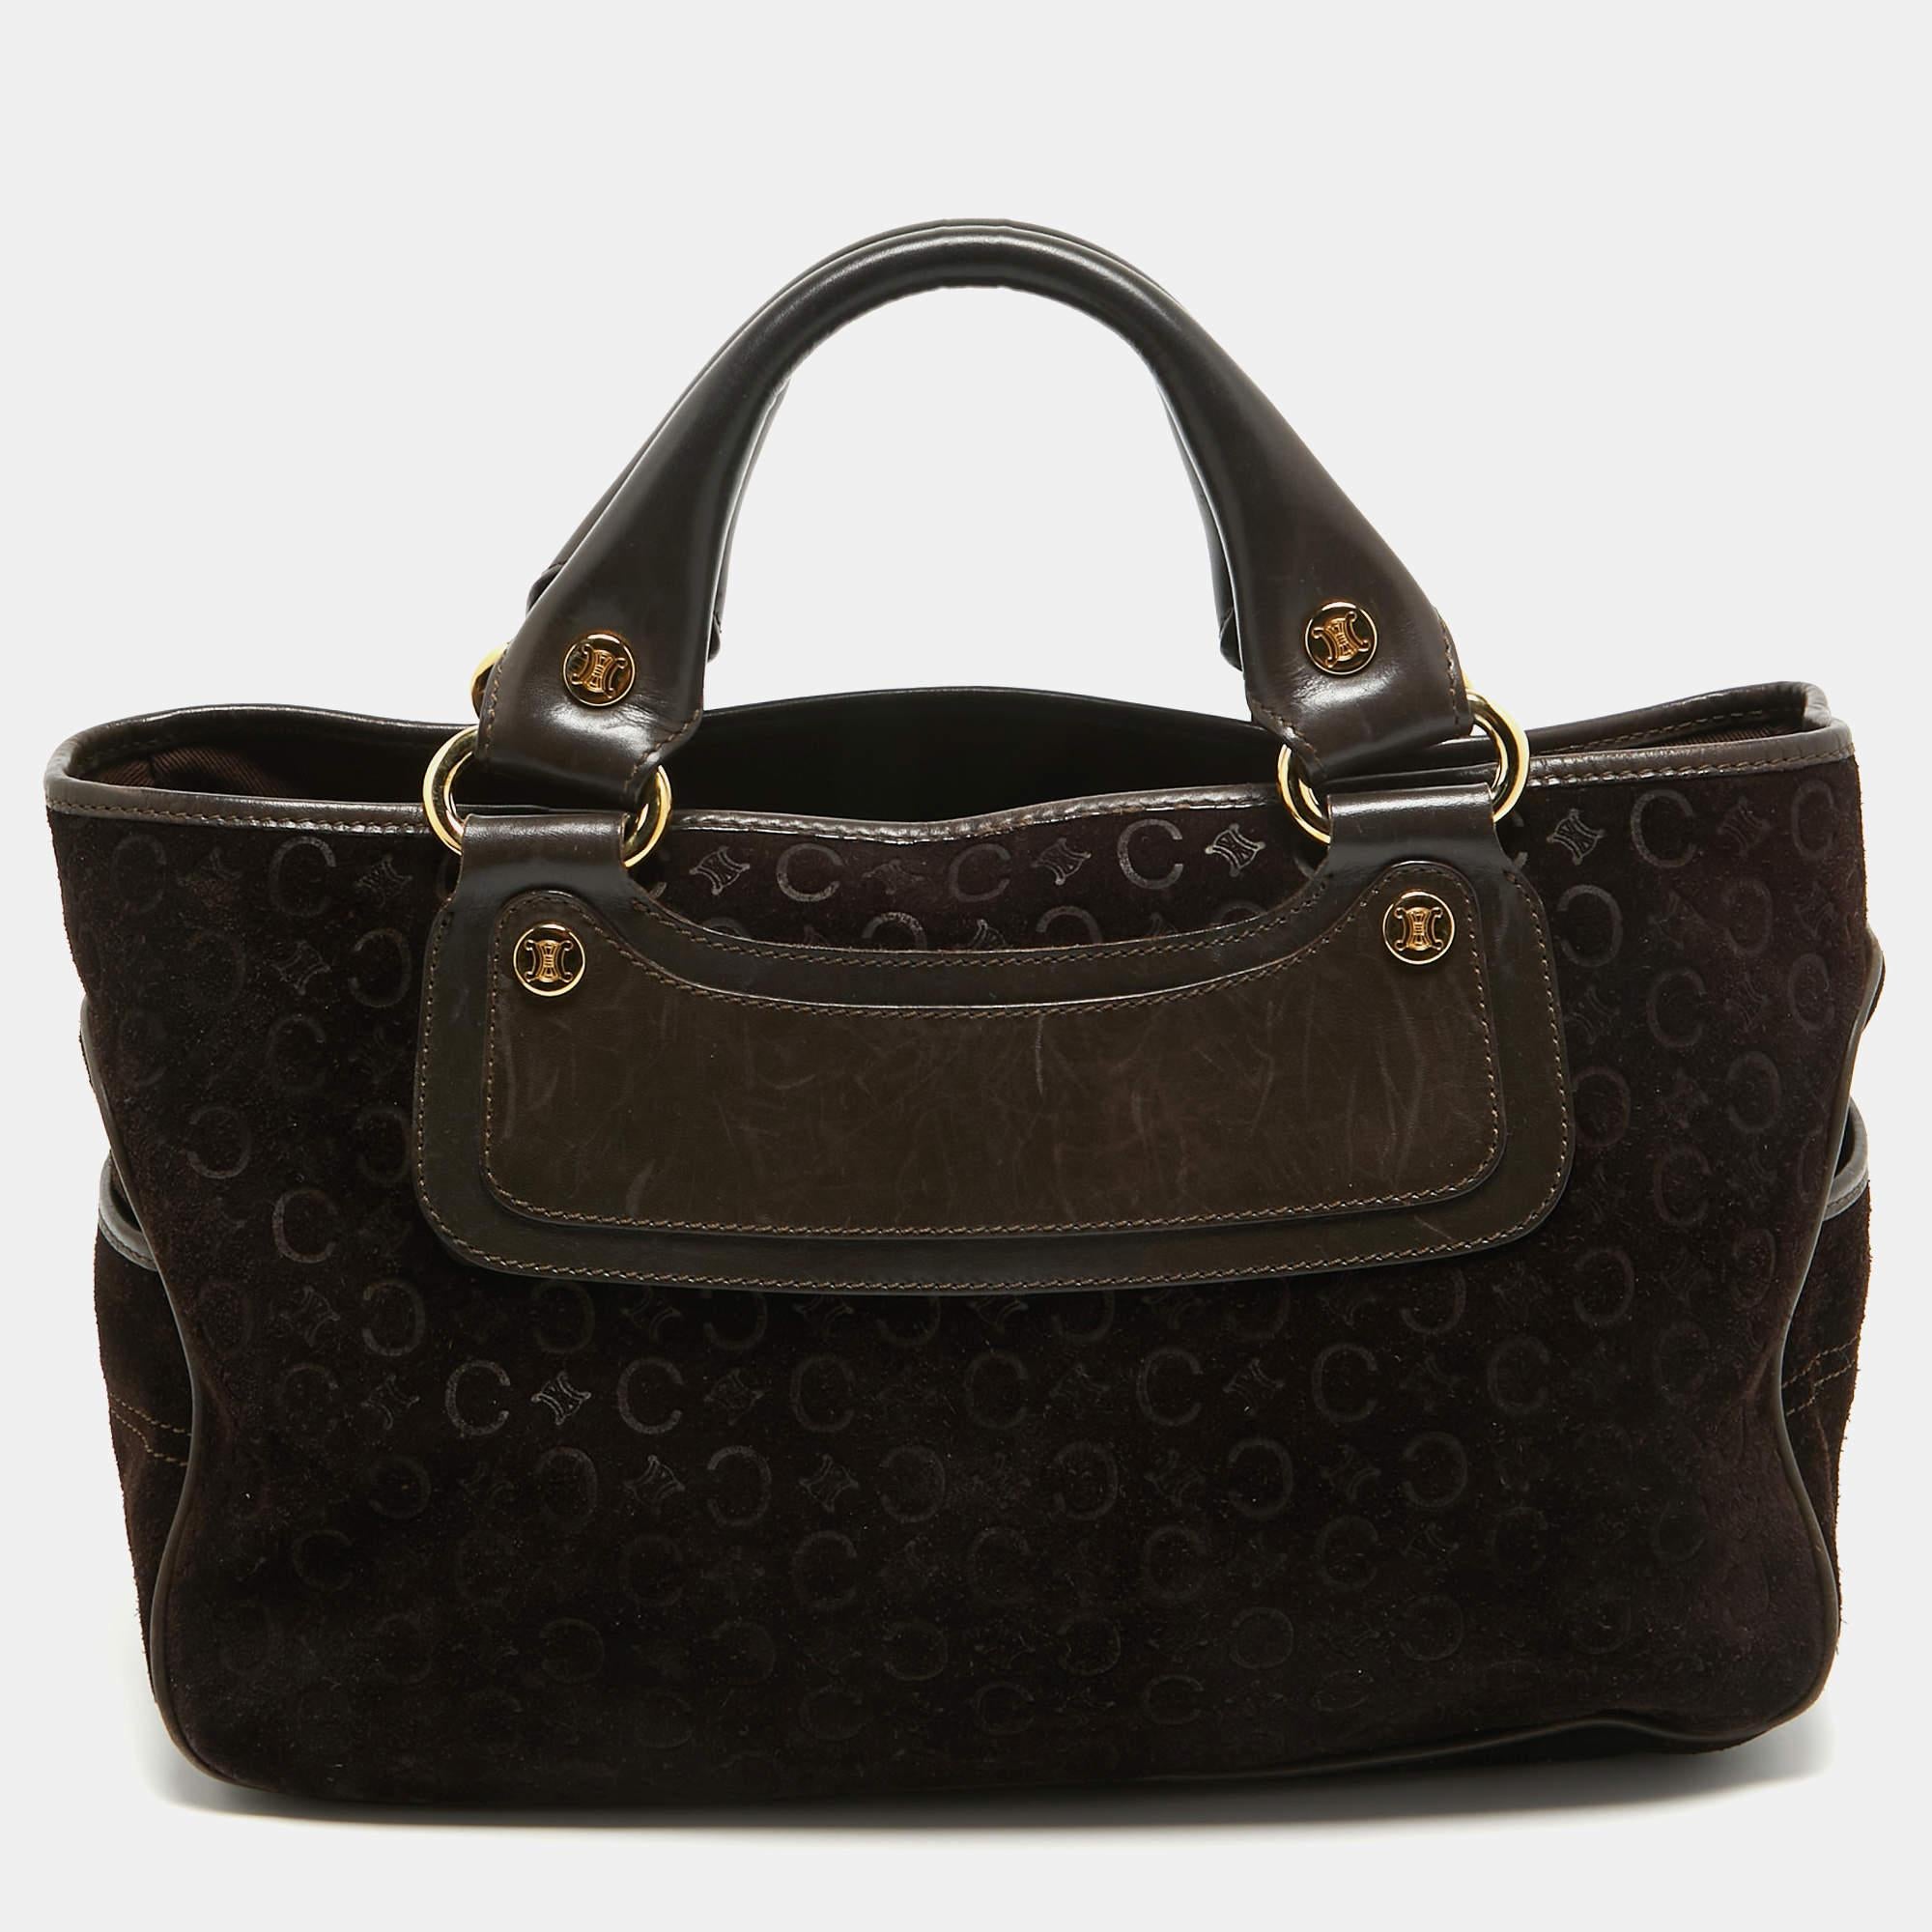 Celine Dark Brown Suede and Leather Boogie Satchel For Sale 4